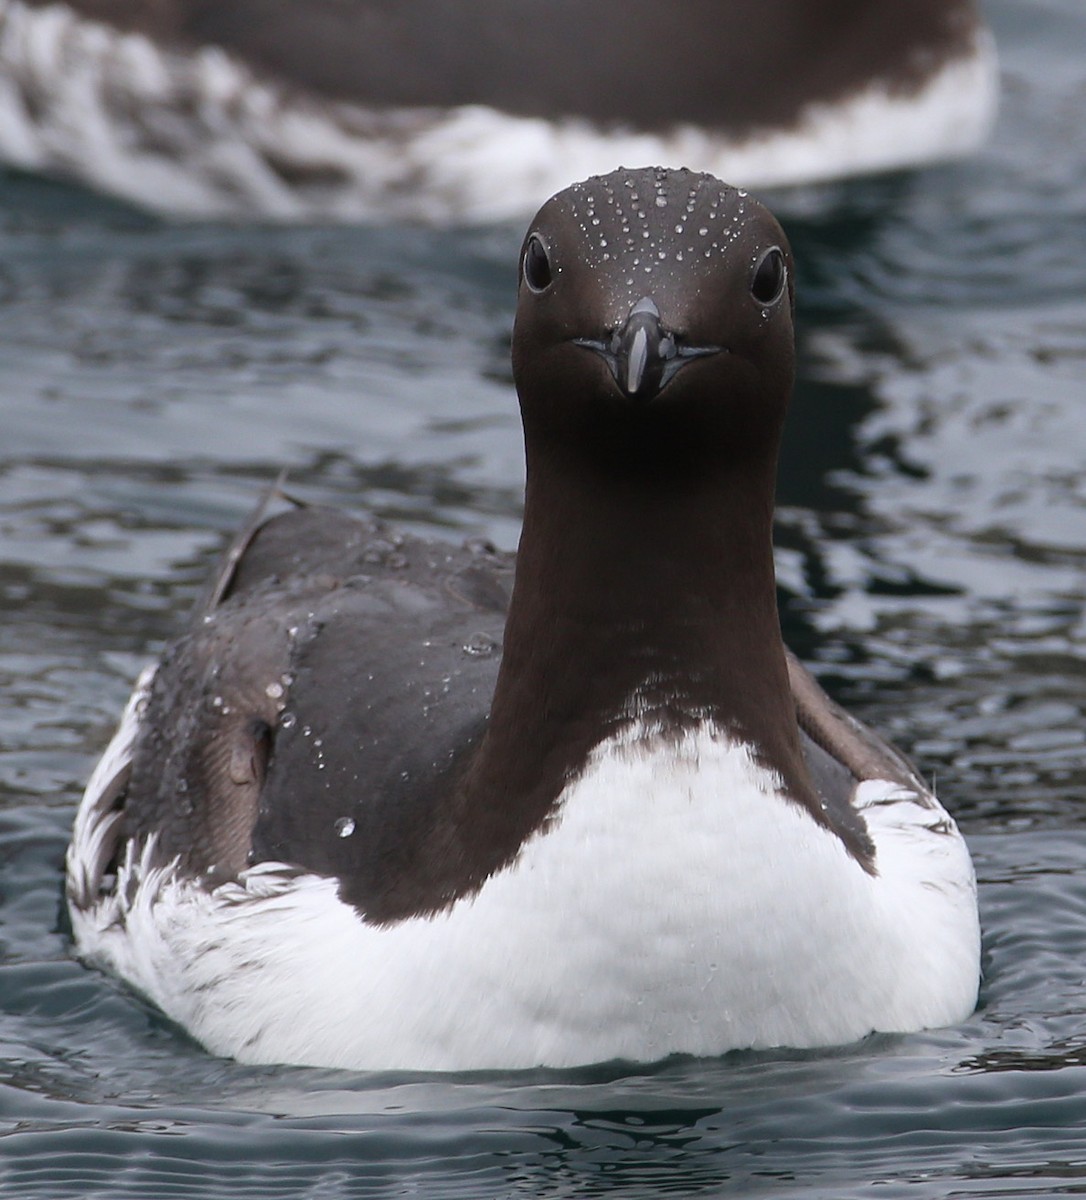 Common Murre - Hal and Kirsten Snyder